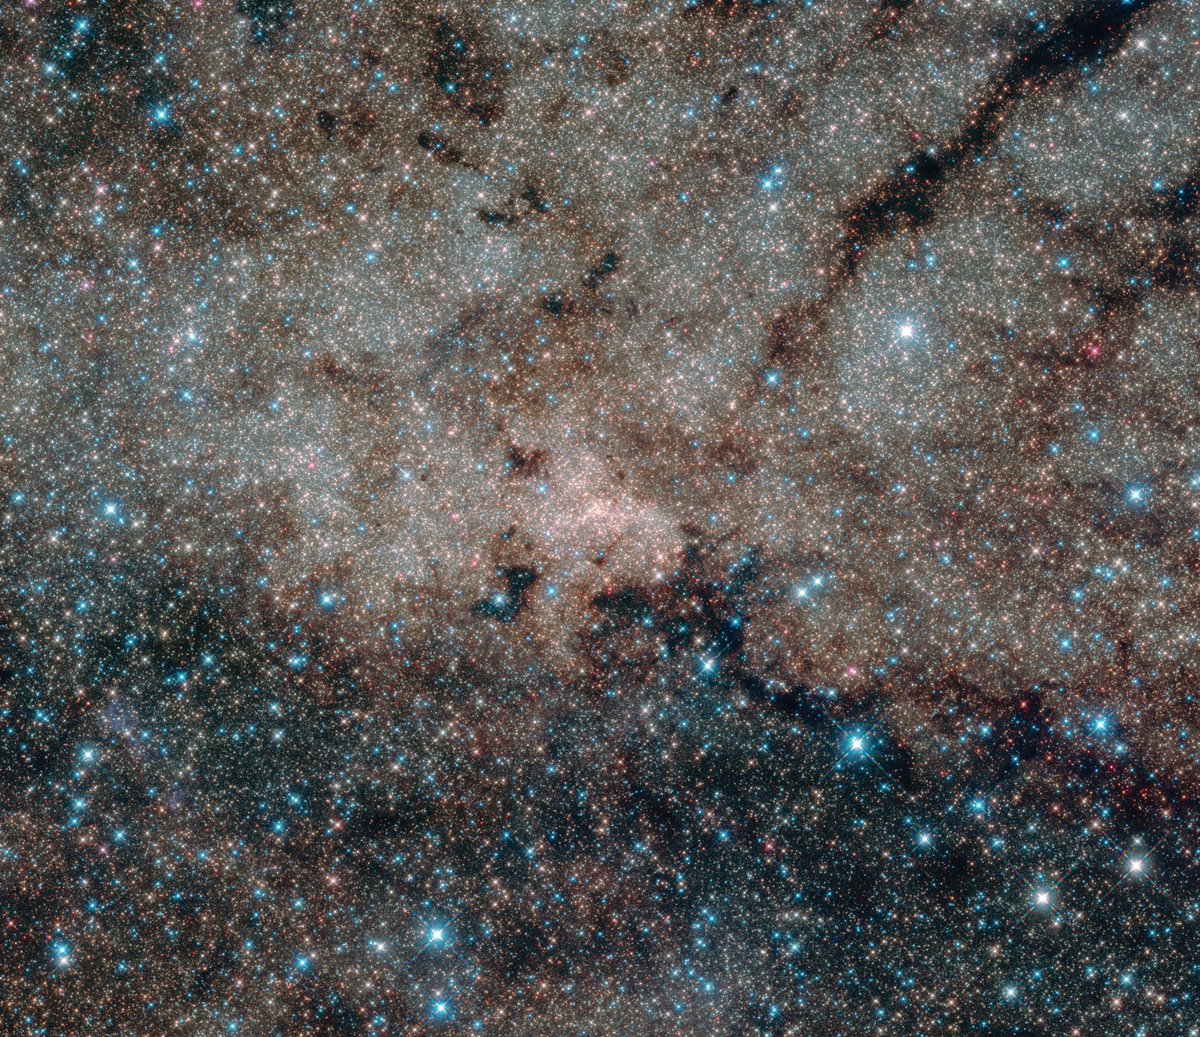 Dive into the stunning complexity of our galaxy's core! This image makes you ponder the countless worlds hidden in these star clusters. Credit: NASA, ESA, and the Hubble Heritage Team (STScI/AURA), T. Do, A. Ghez (UCLA), V. Bajaj (STScI)